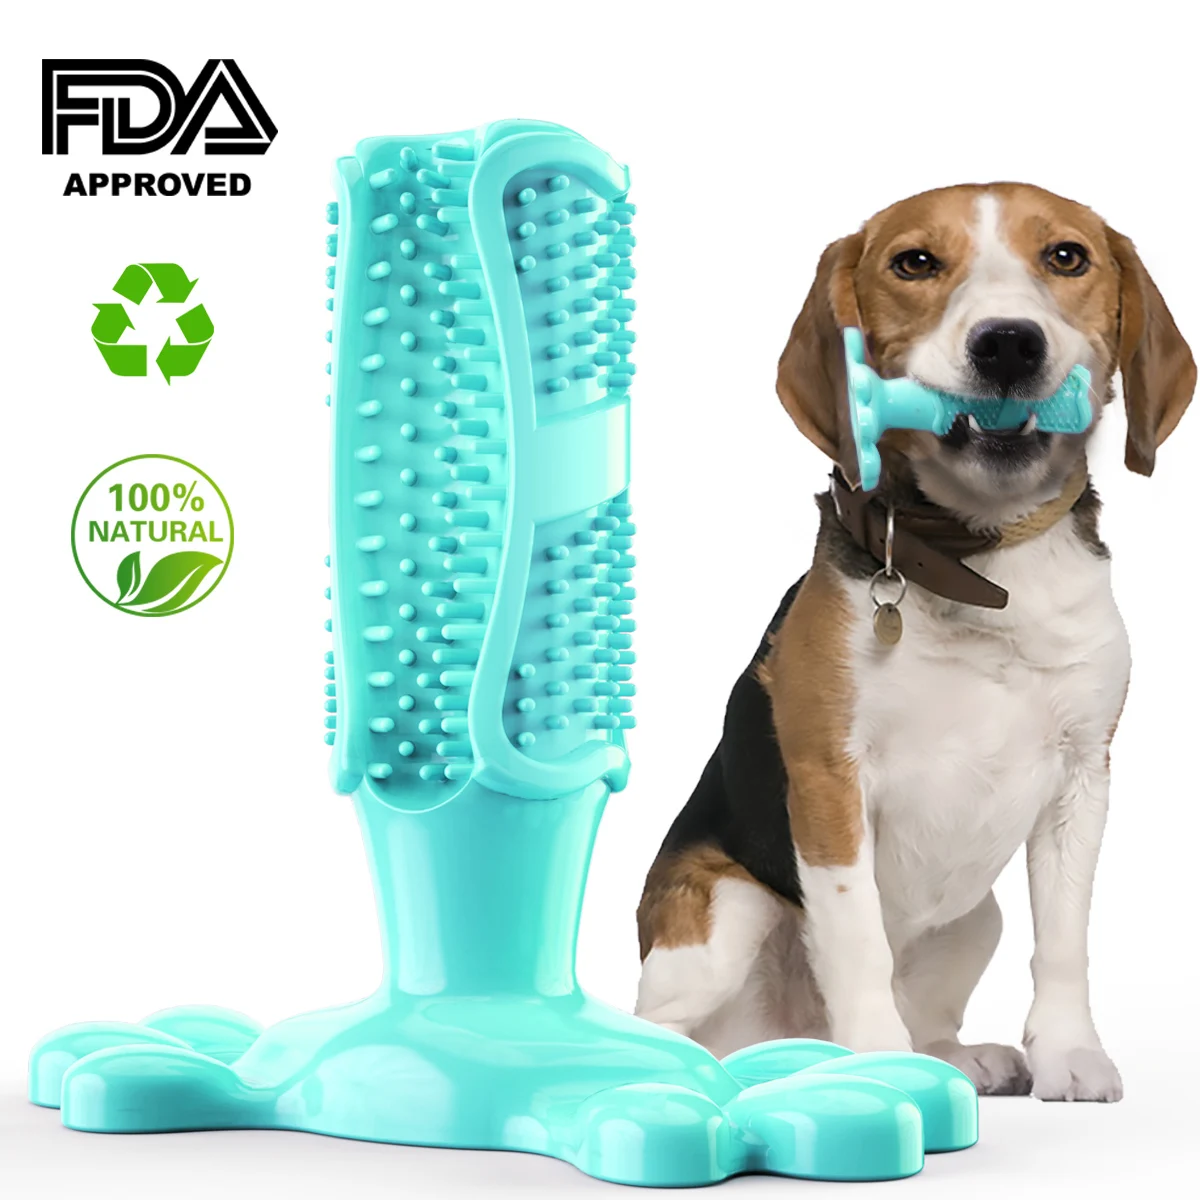 https://ae01.alicdn.com/kf/S49f0055b29f64c99882ad35cd1edb19do/Dog-Chew-Toys-Pet-Supplies-Natural-Rubber-Dog-Toothbrush-Toy-For-Dog-Teeth-Cleansing-And-Toothbrush.jpg